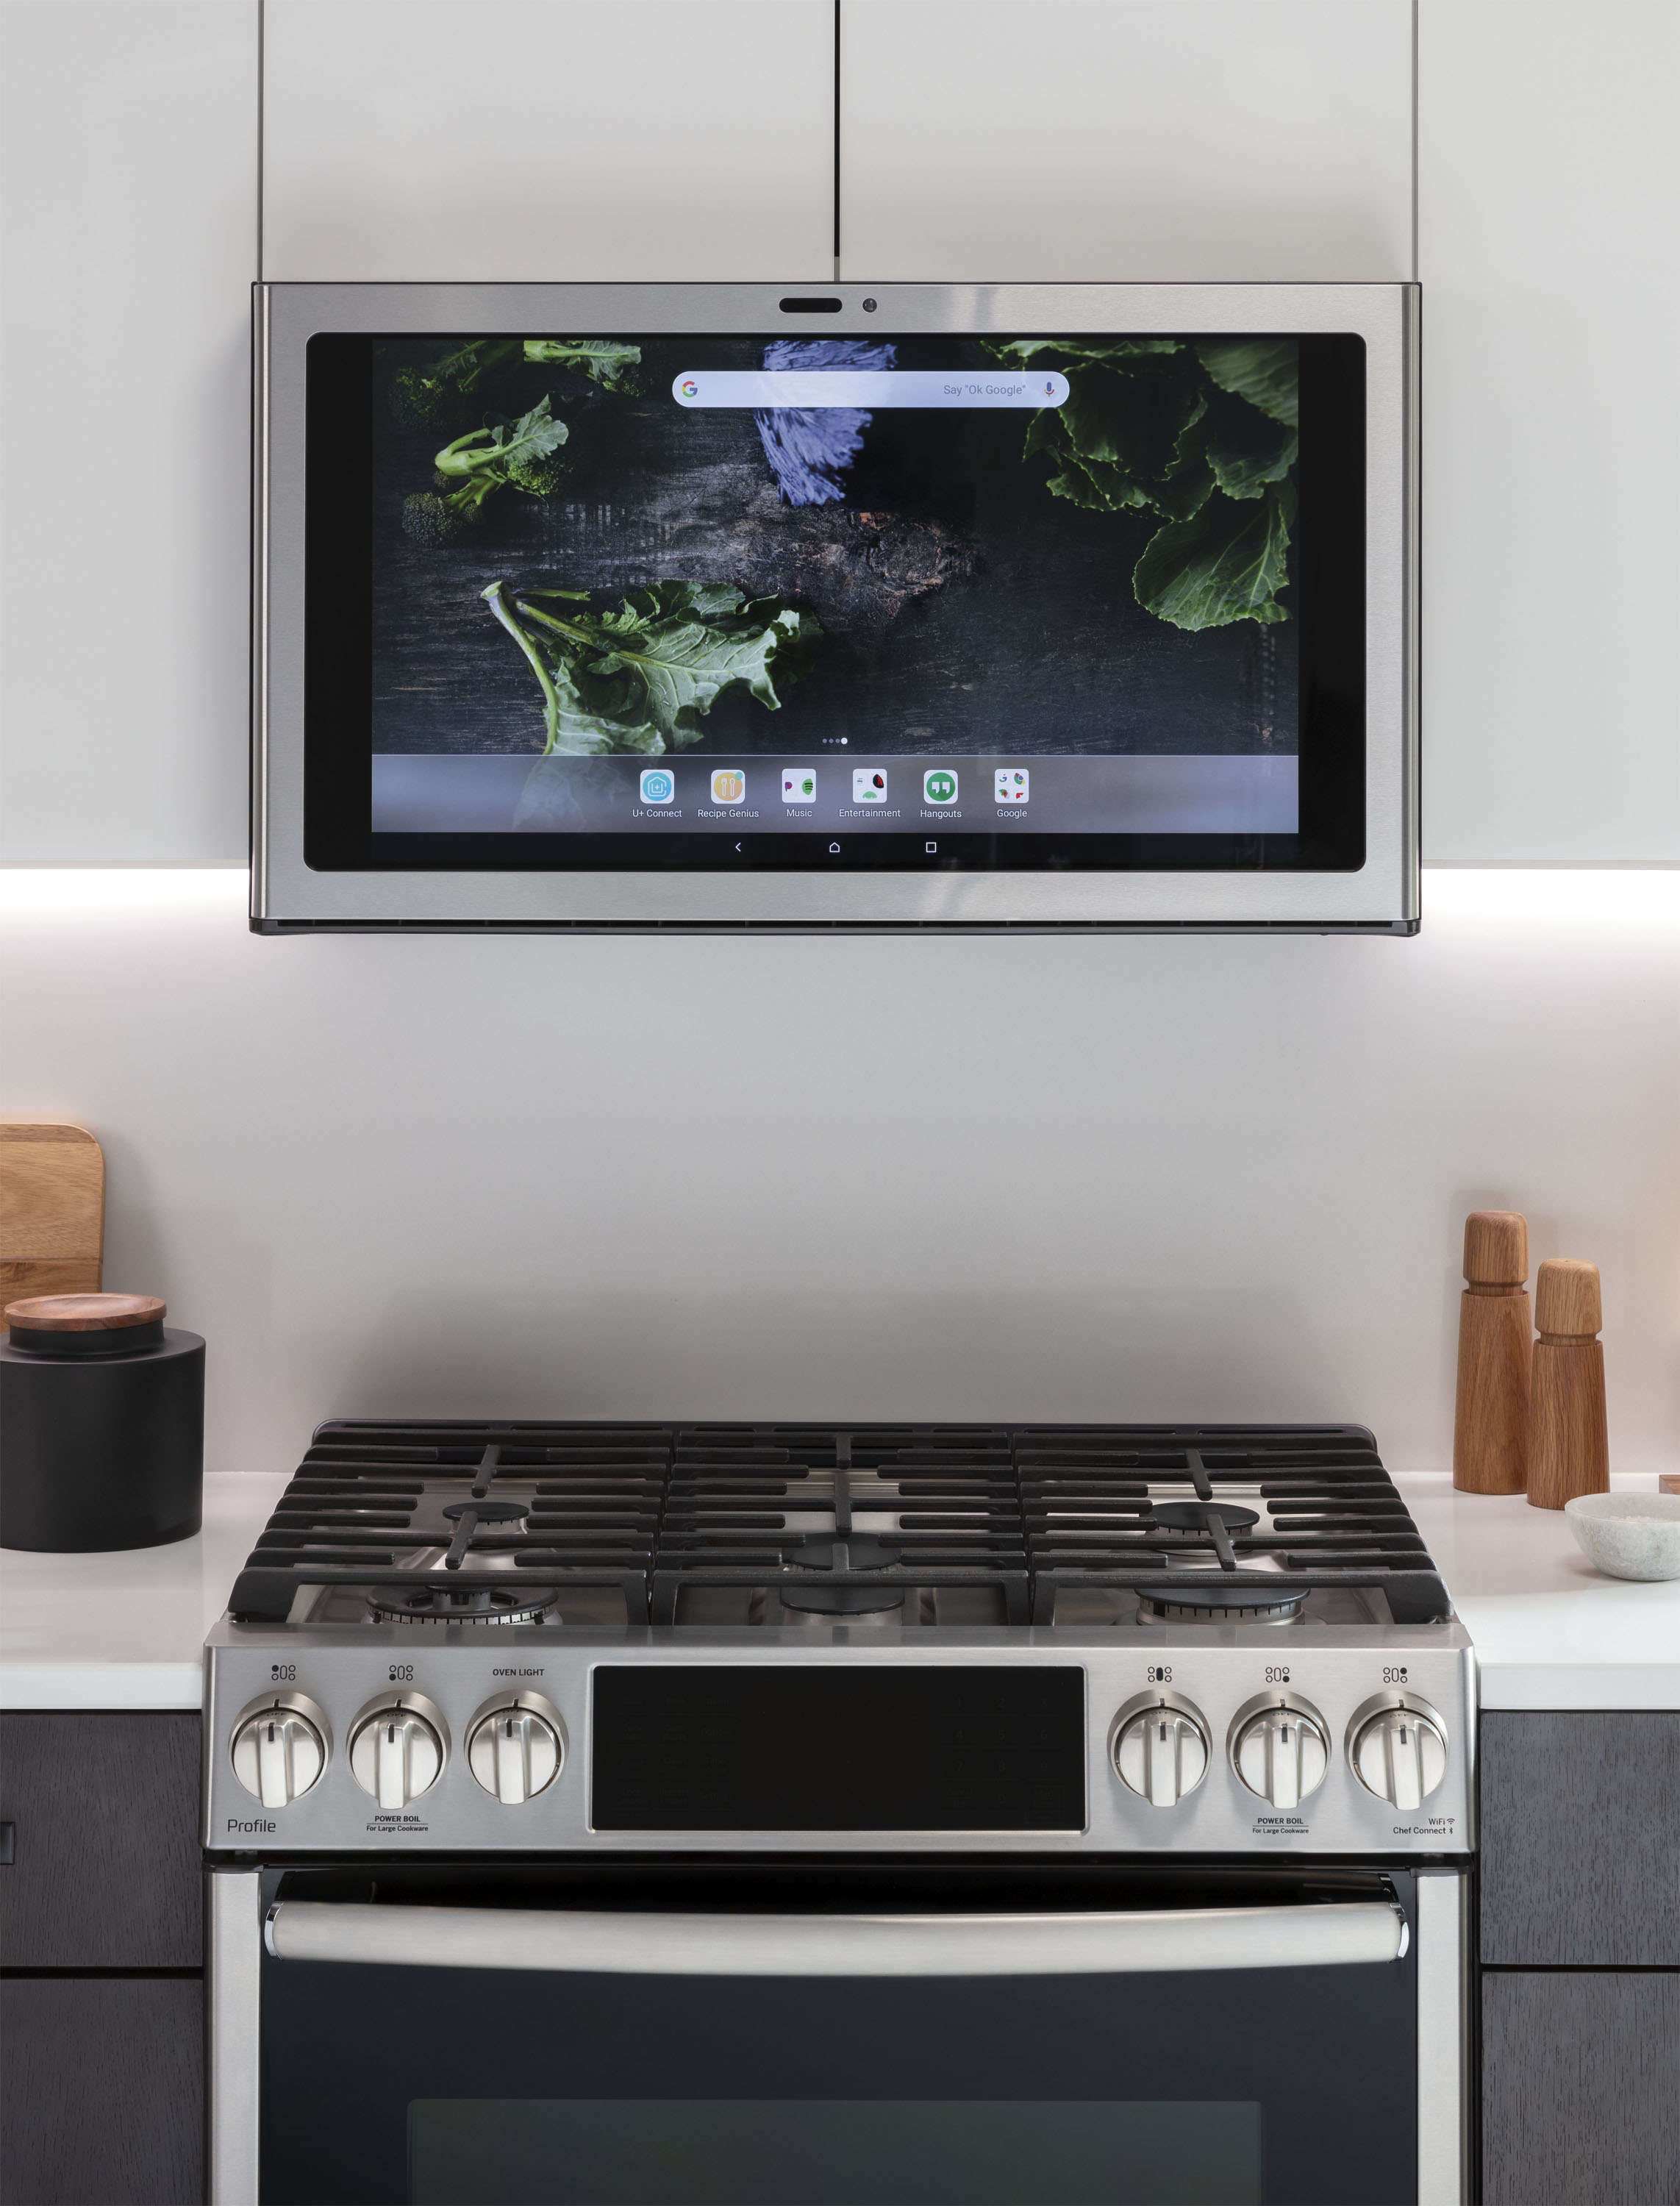 This is GE's Kitchen Hub, a 27-inch smart touchscreen display powered